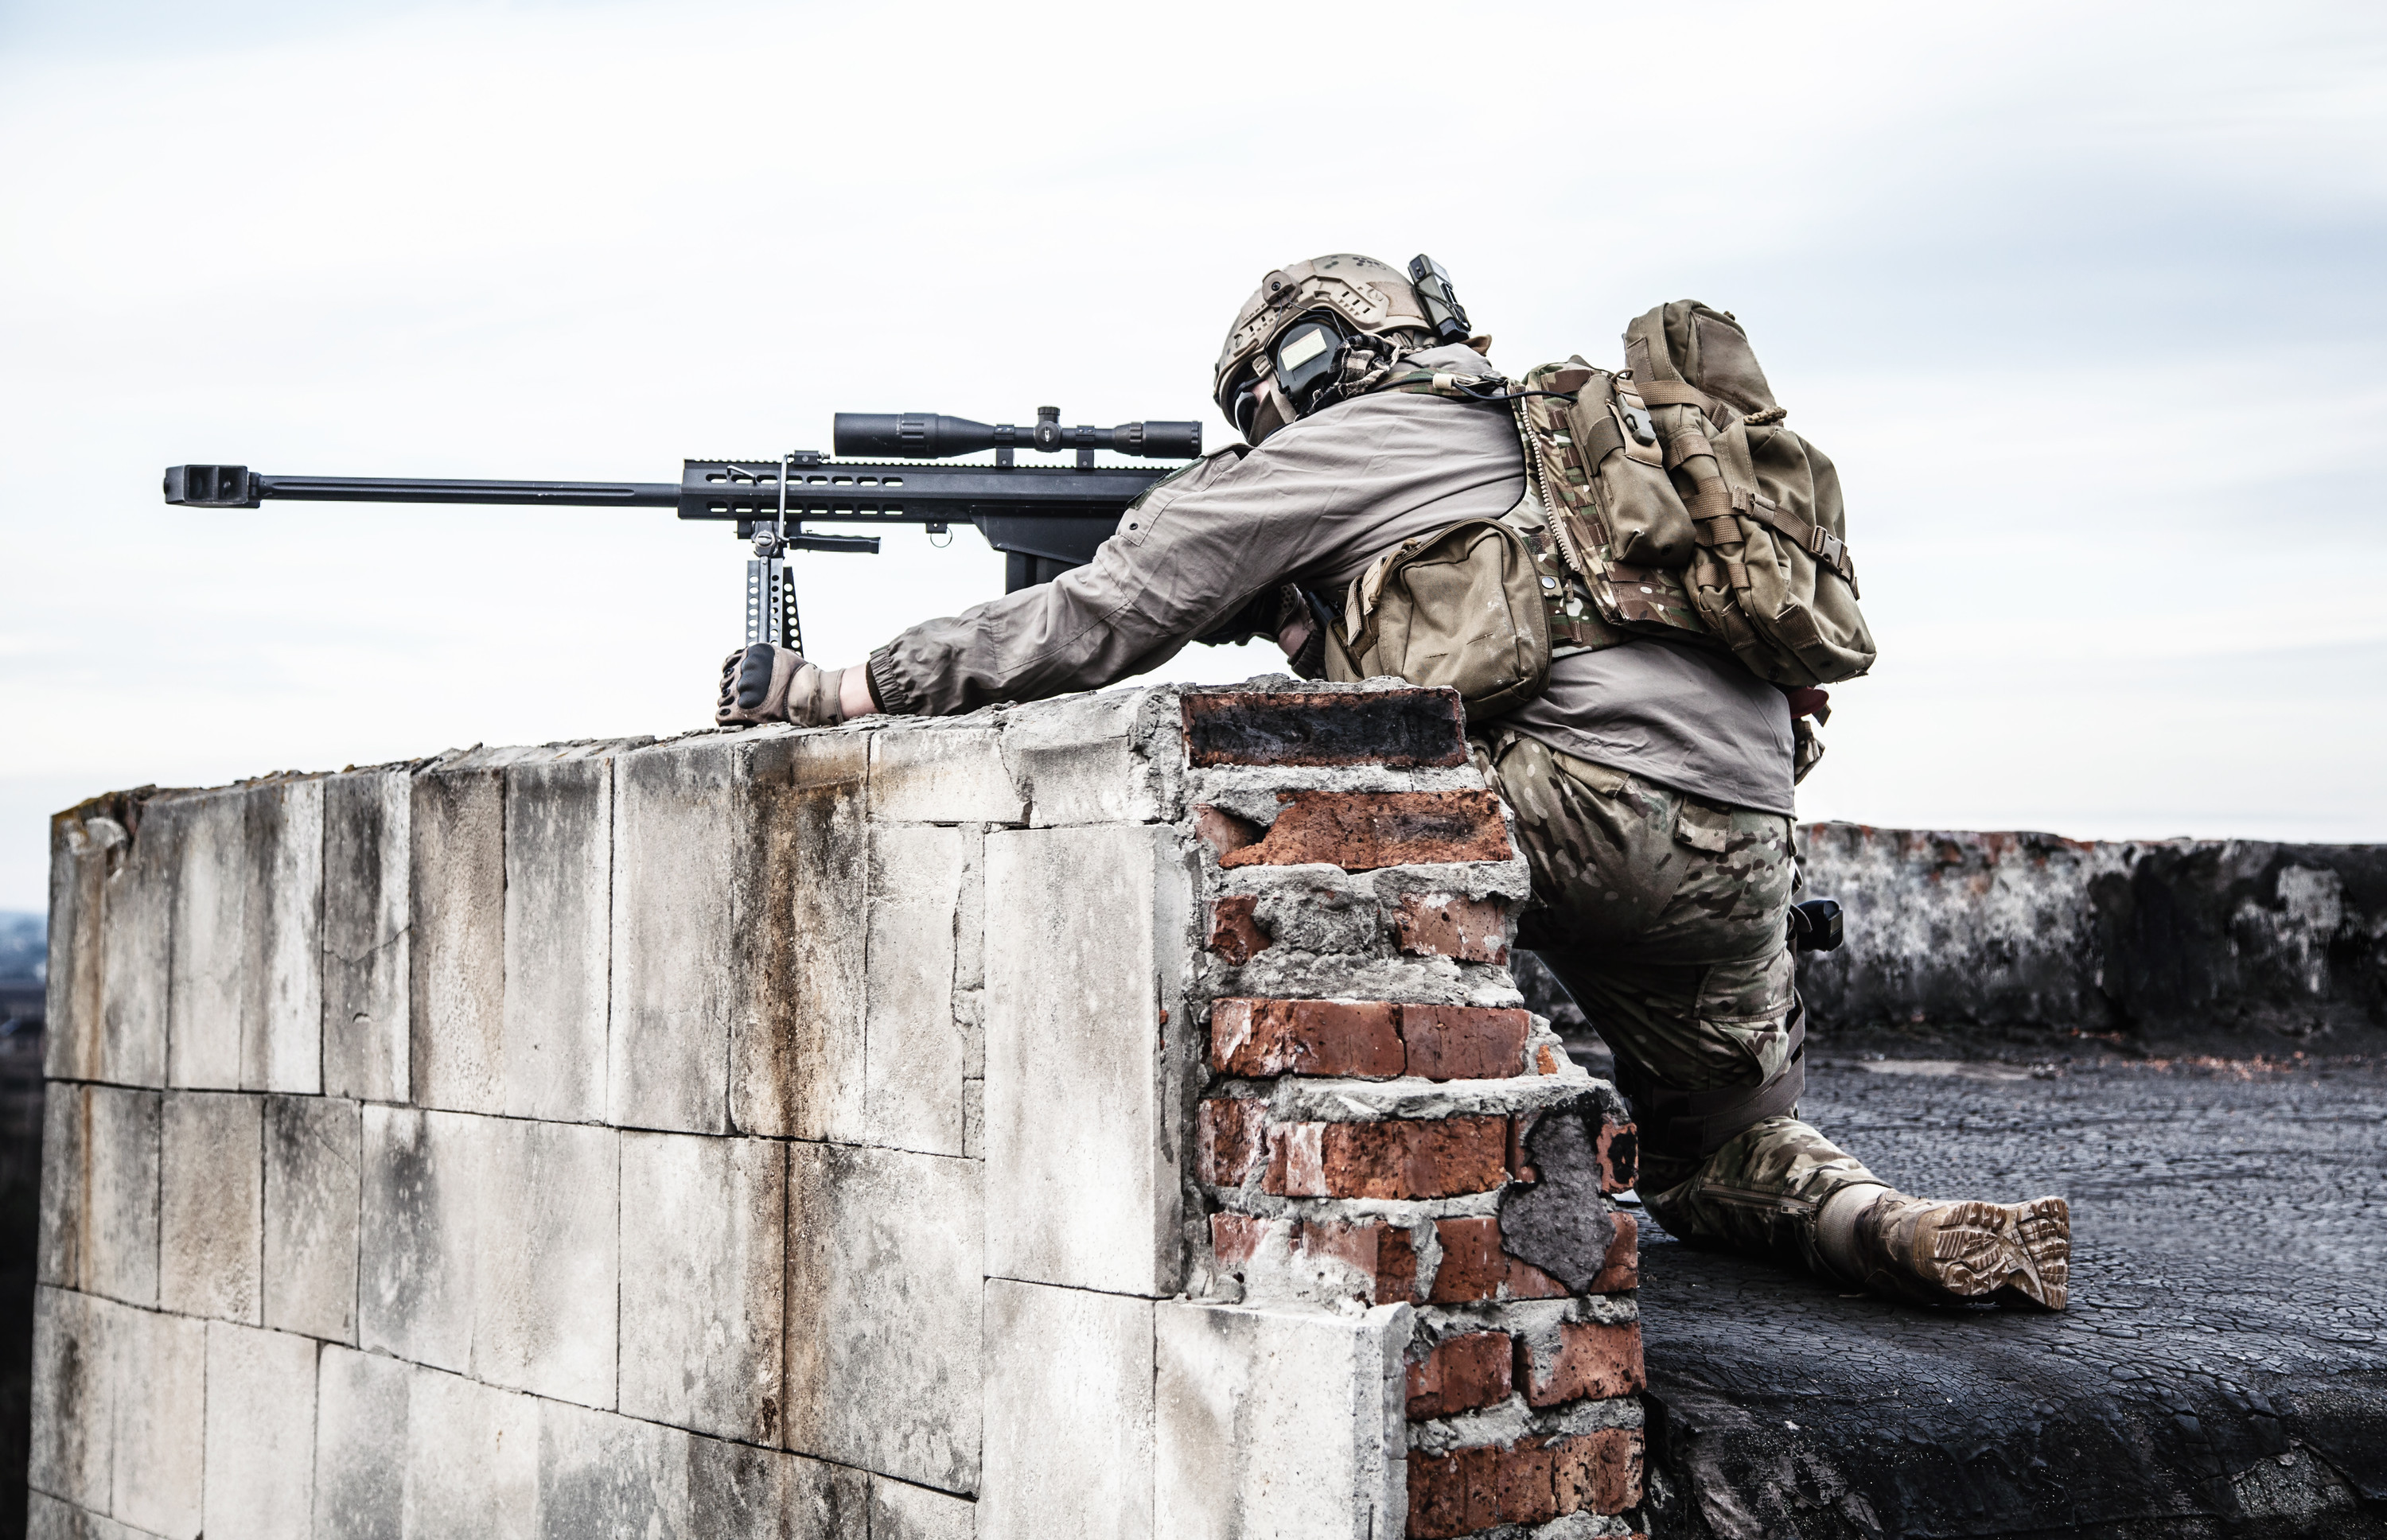 Sniper wallpapers, Military, HQ Sniper pictures | 4K Wallpapers 2019